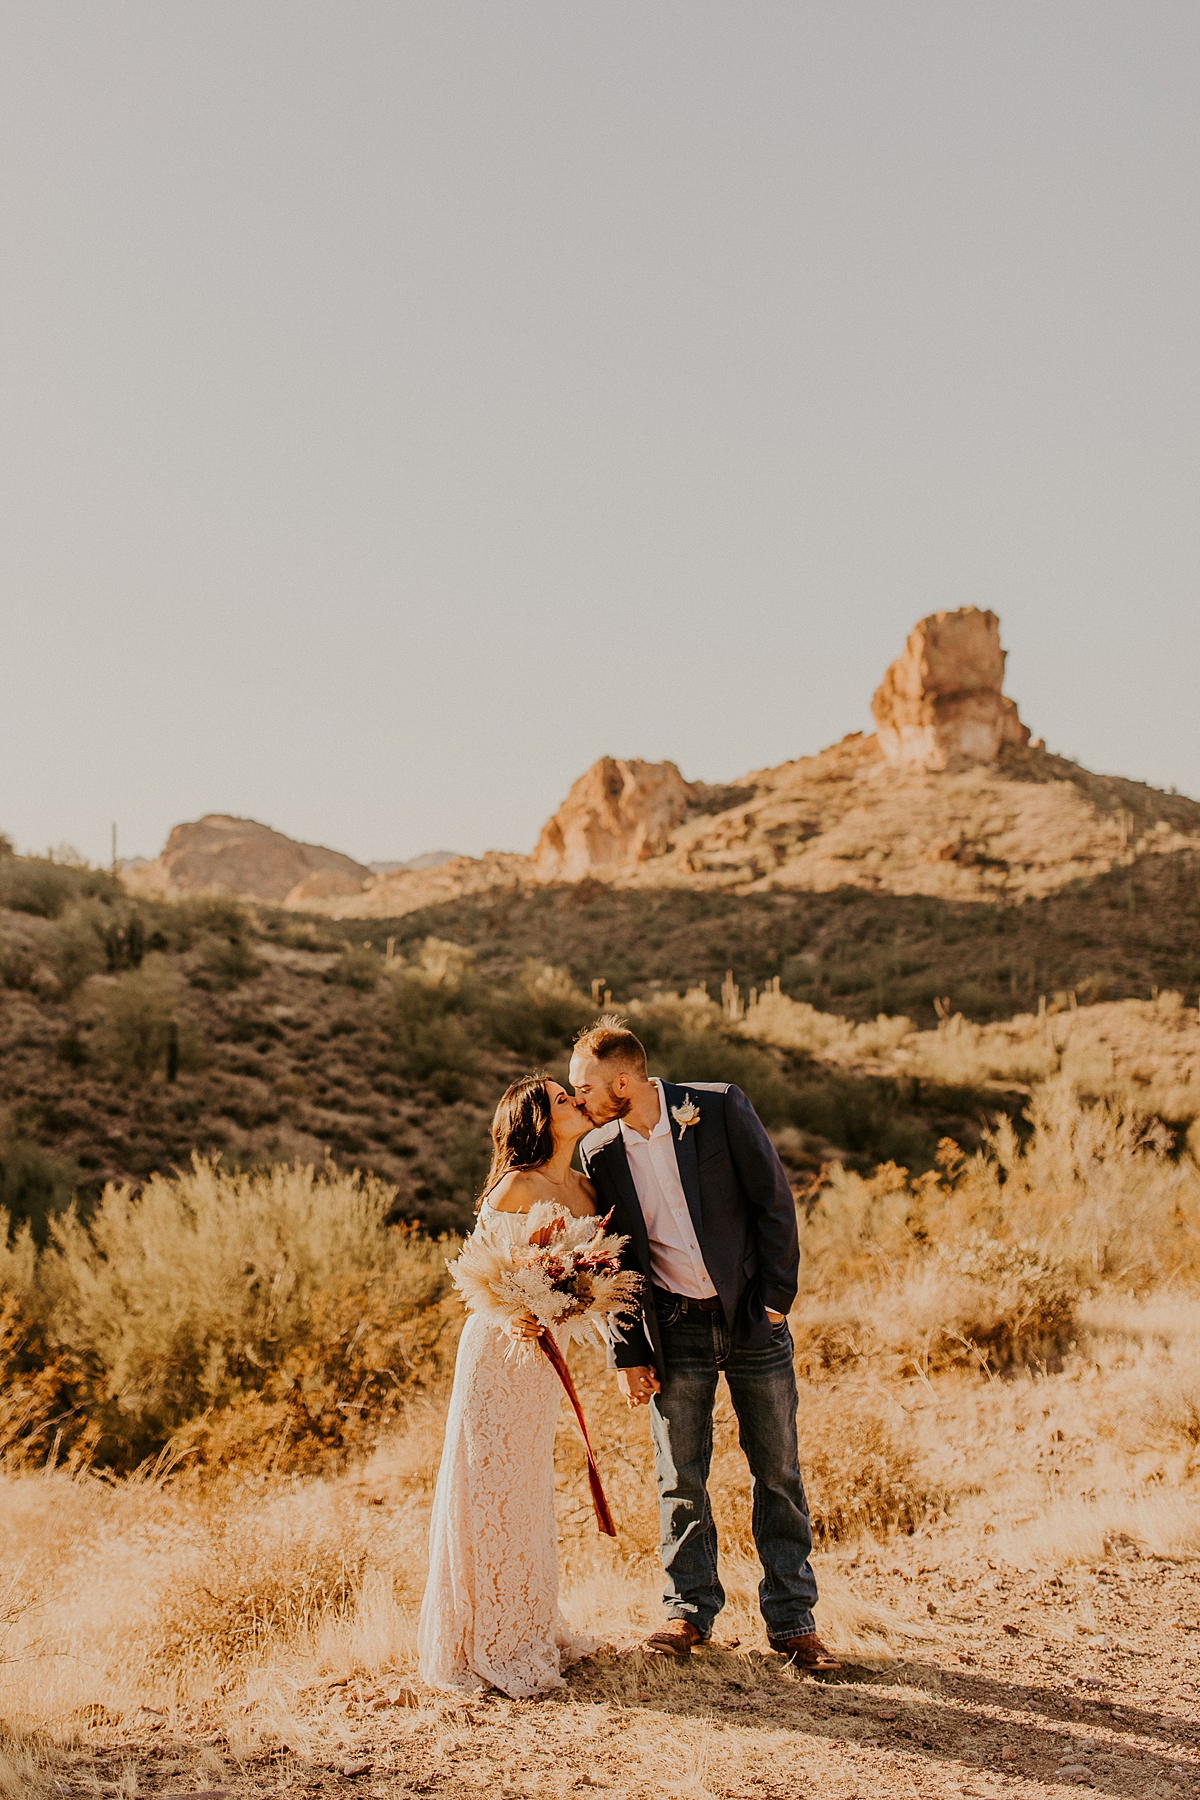 Intimate-elopement-in-superstition-mountain-wilderness-allison-slater-photography44.jpg